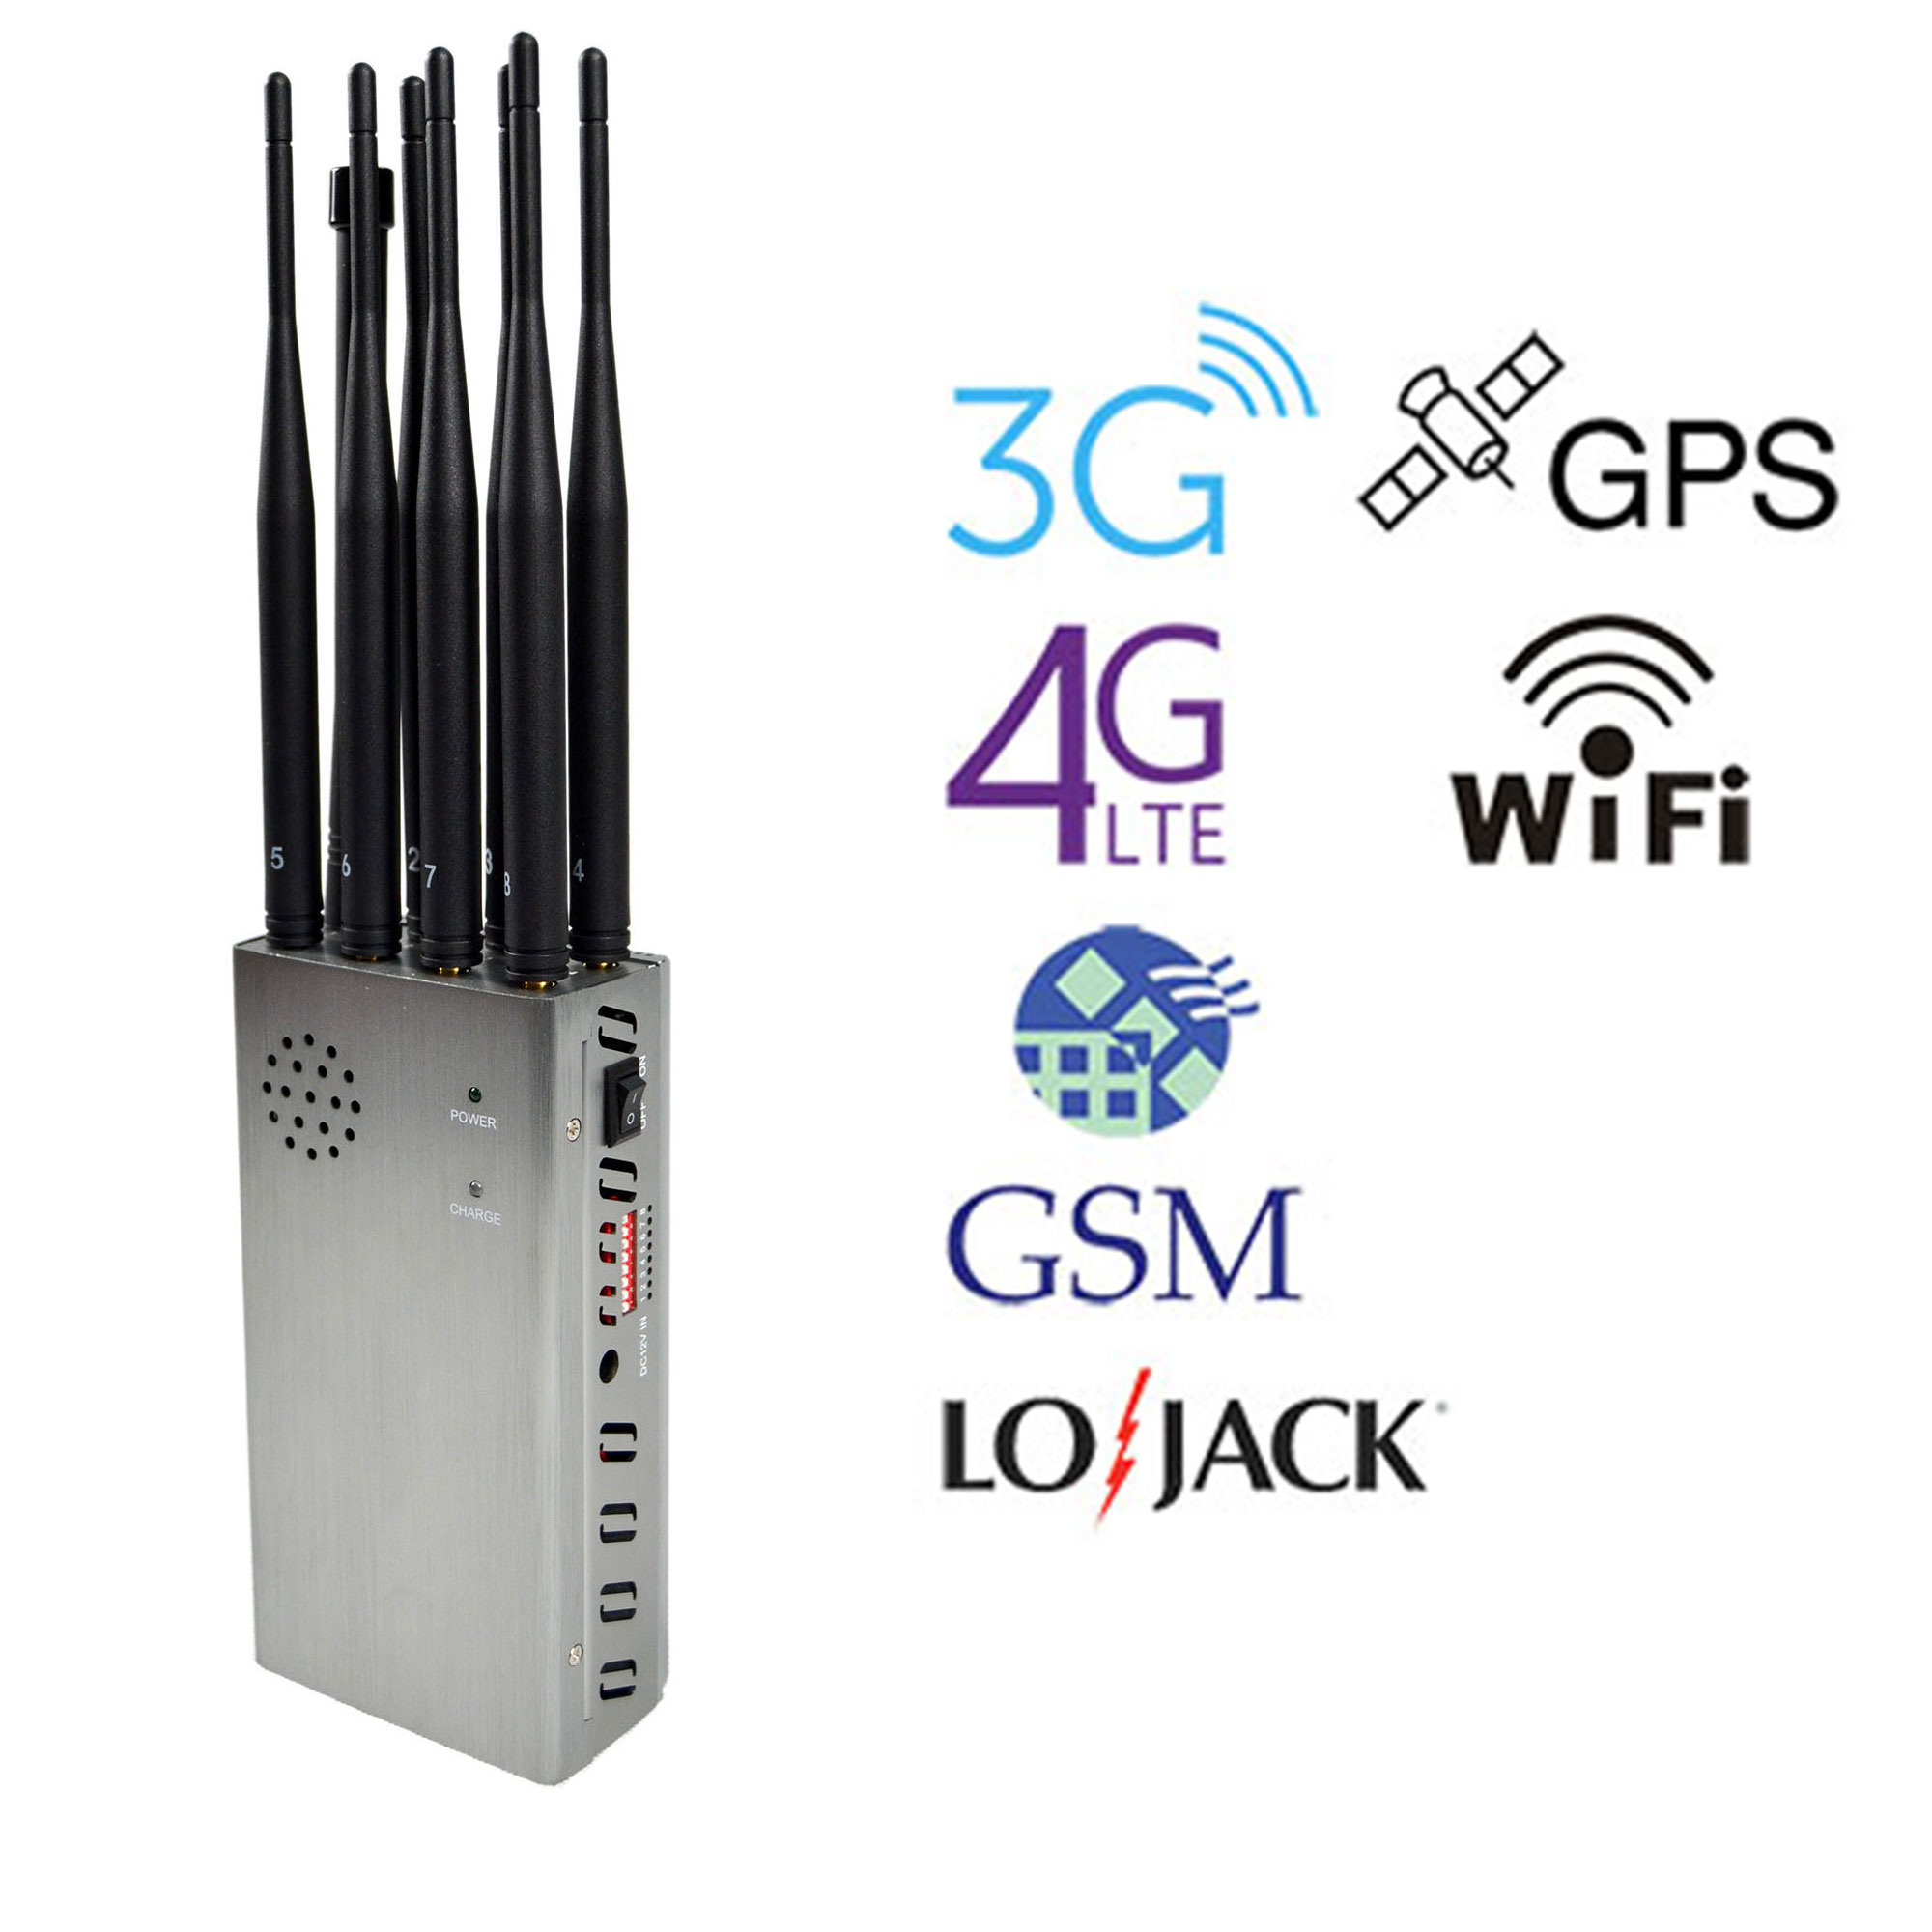 5g phone jammer , Portable 8 Antennas Cell Phone Jammers With 2g 3G 4G And LOJACK GPS WIFI Signals